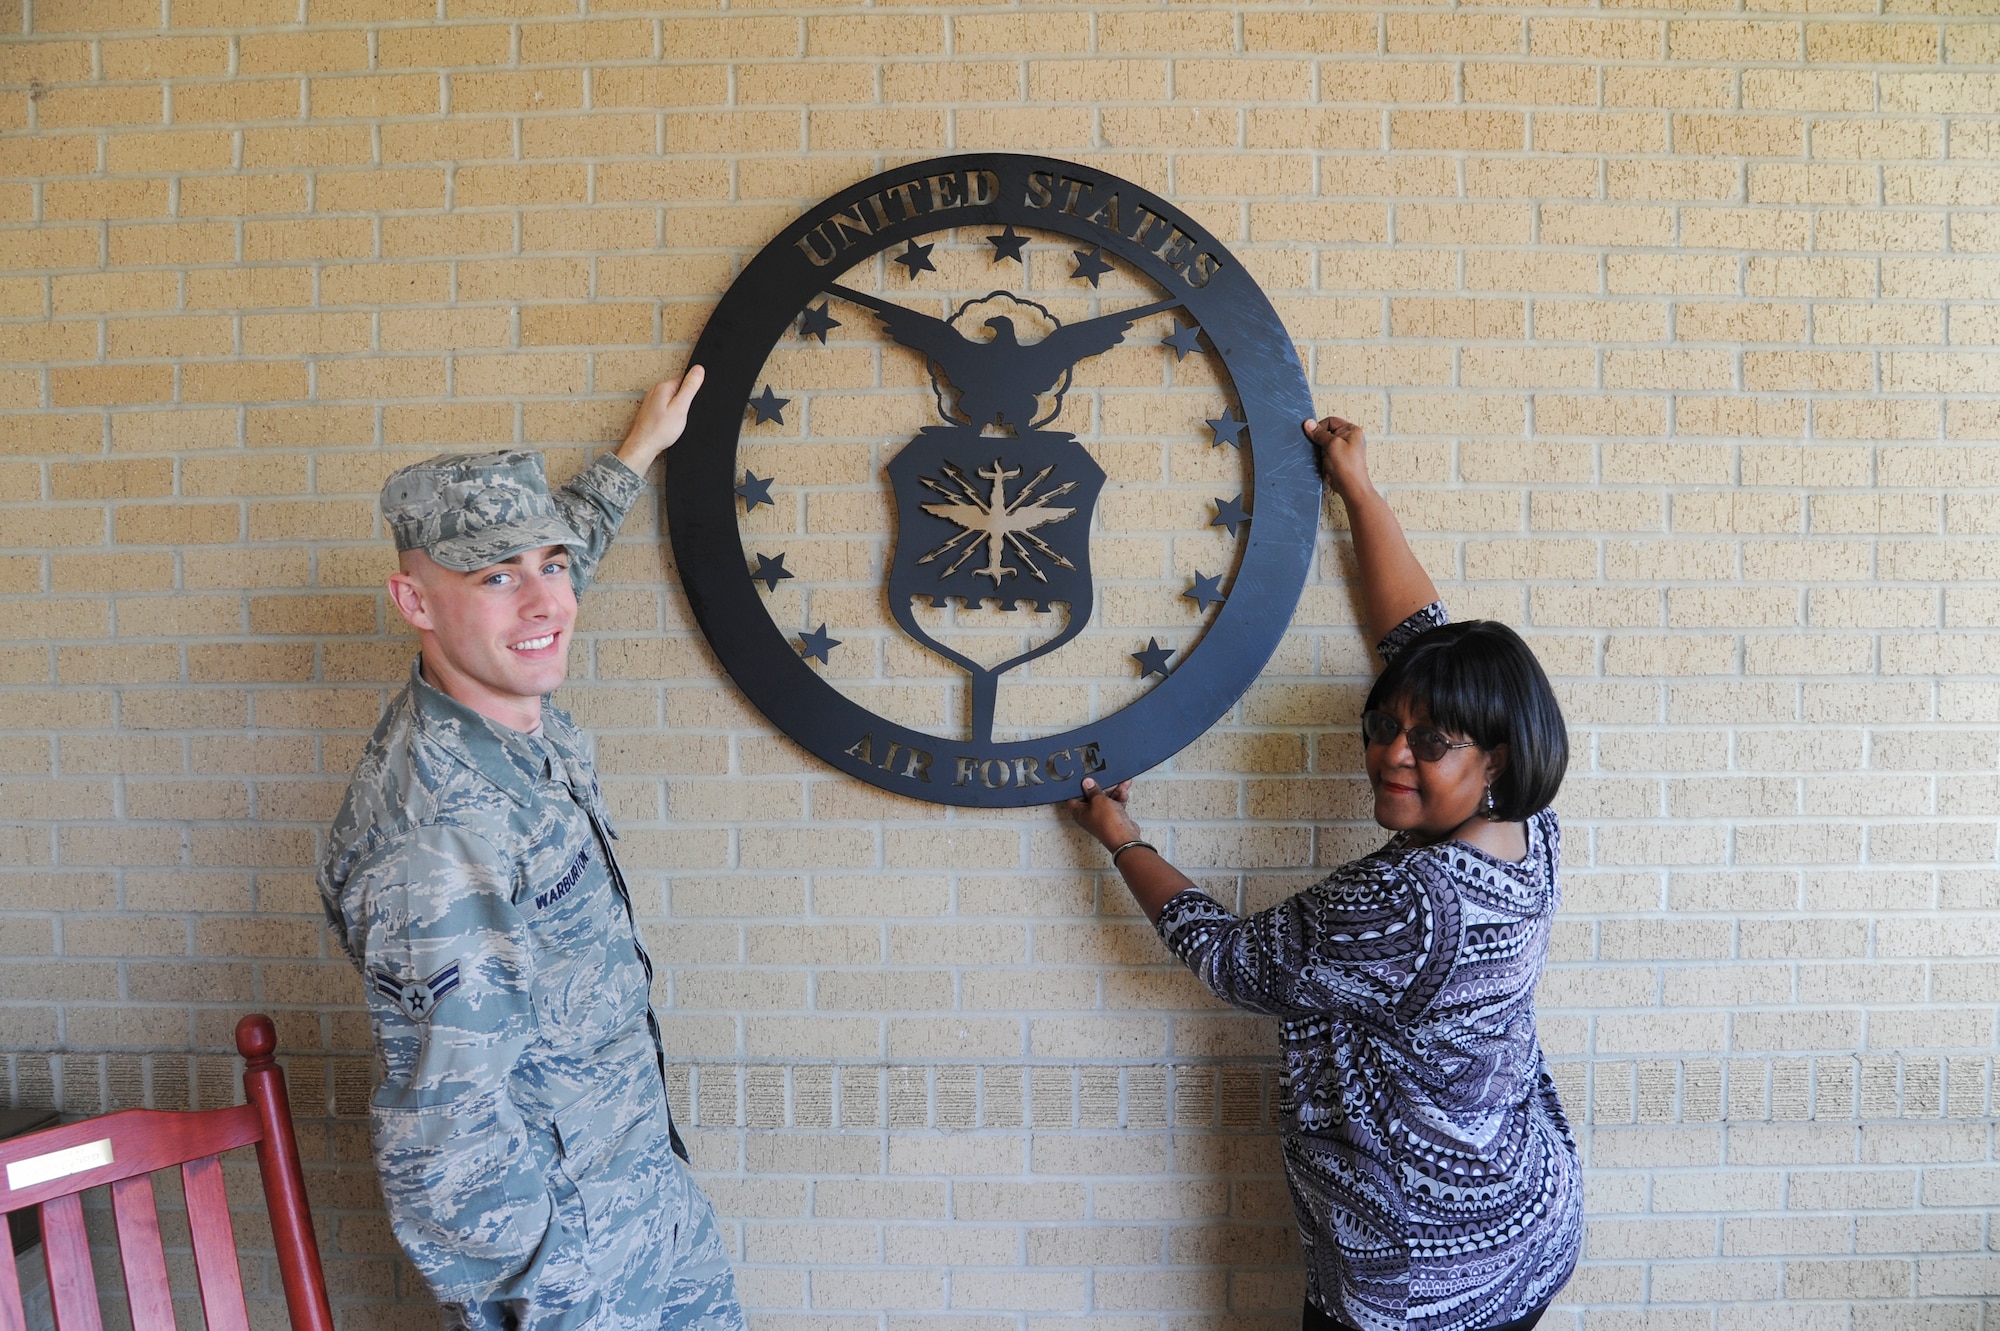 U.S. Air Force Airman 1st Class Westin Warburton, Air Force Public Affairs Agency photographer, displays a donated United States Air Force emblem with Ms. Ramona Lewis, Lackland Fisher Houses manager, at Joint Base San Antonio-Lackland, Texas, March 25, 2013. The average stay at a Fisher House is 16 days and the longest stay is 358. (U.S. Air Force photo by Senior Airman Grovert Fuentes-Contreras)